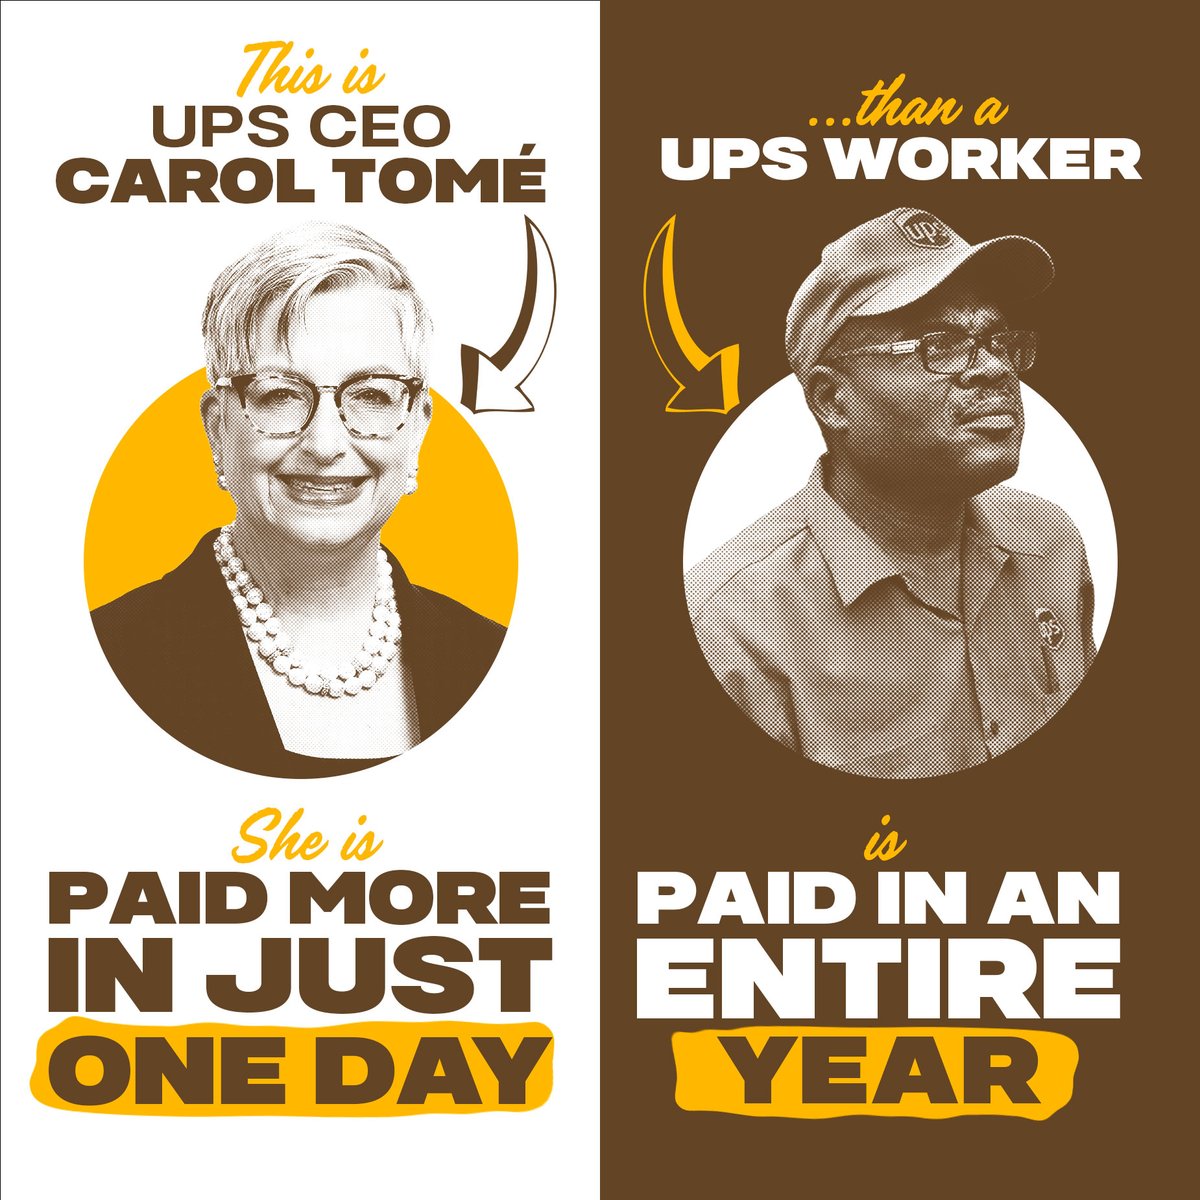 A HARD DAY’S WORK
Just gonna leave this here for the weekend.

As #Teamsters wait for a real, respectful economic proposal from @UPS executives, let’s not forget the enormous salaries, stock awards, and Wall Street buybacks that always find their way to the top. #1u